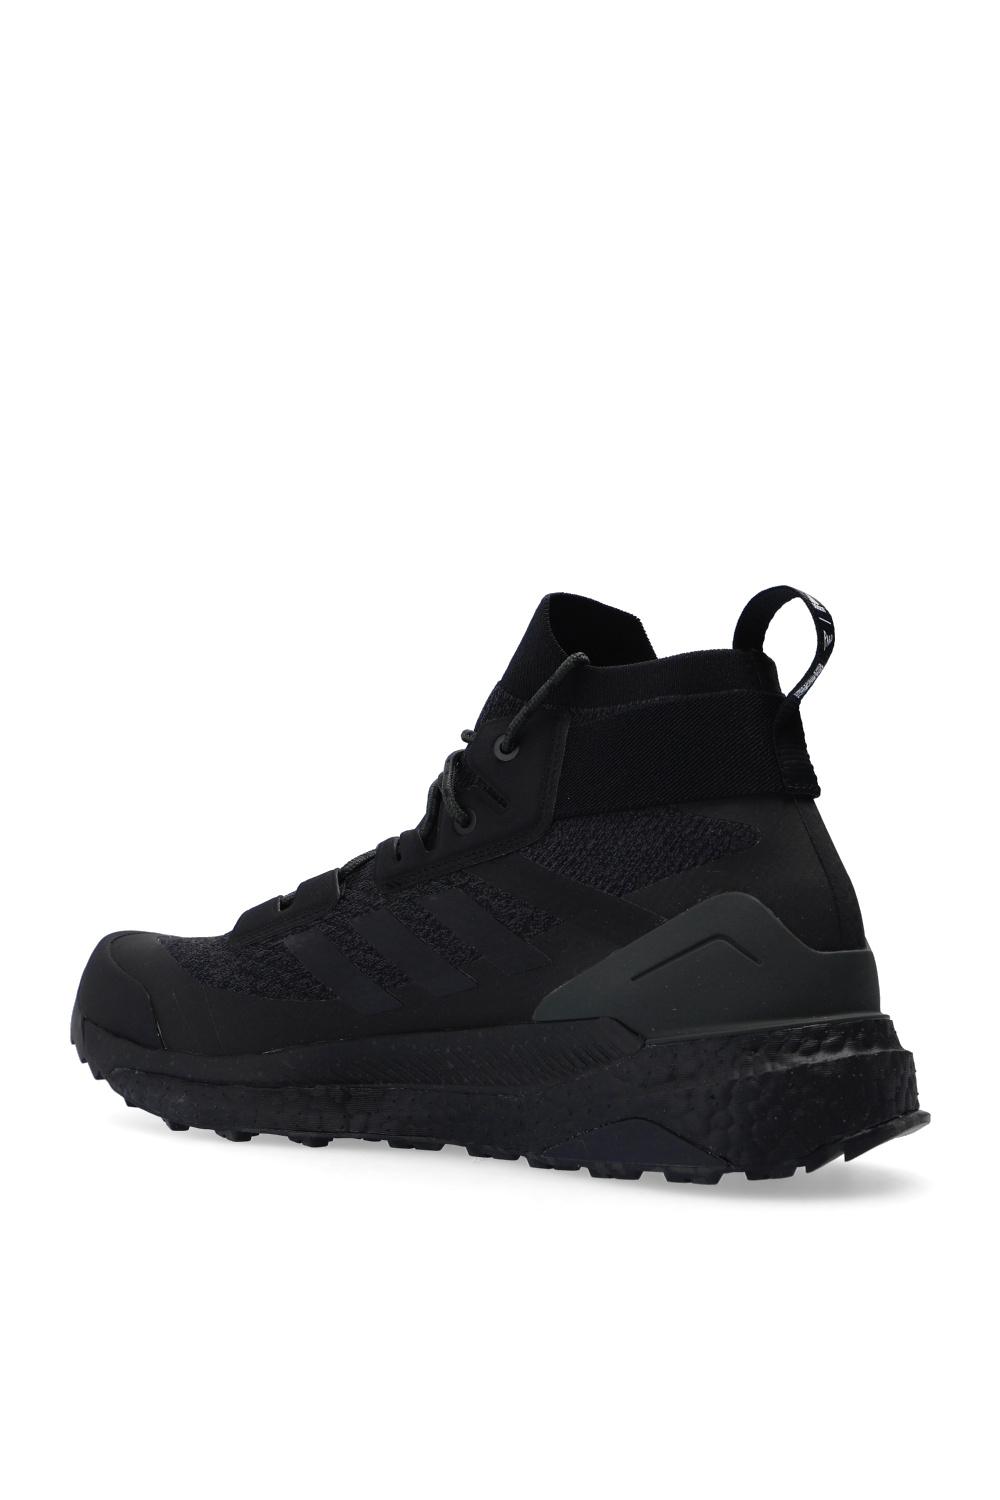 ADIDAS Performance adidas prophere outfit for women black